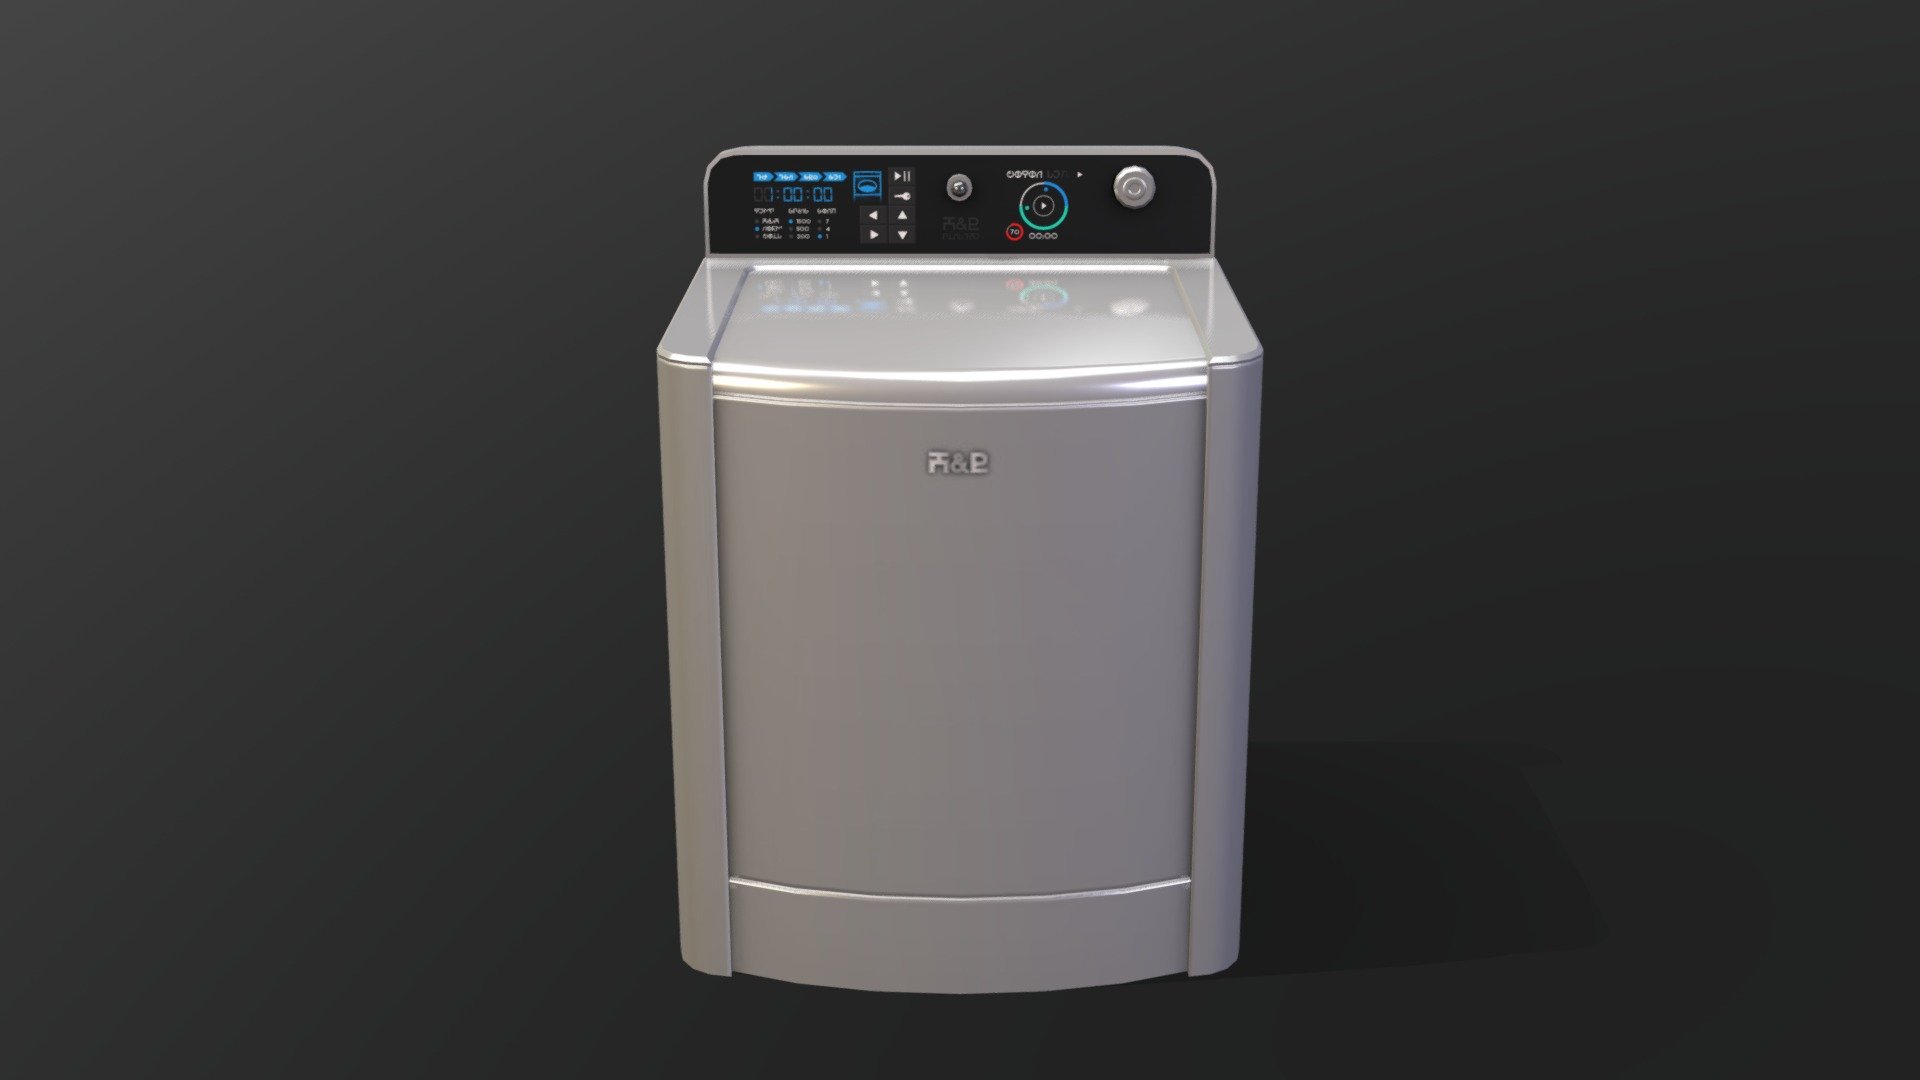 Top Load Washing Machine - The Sims 3